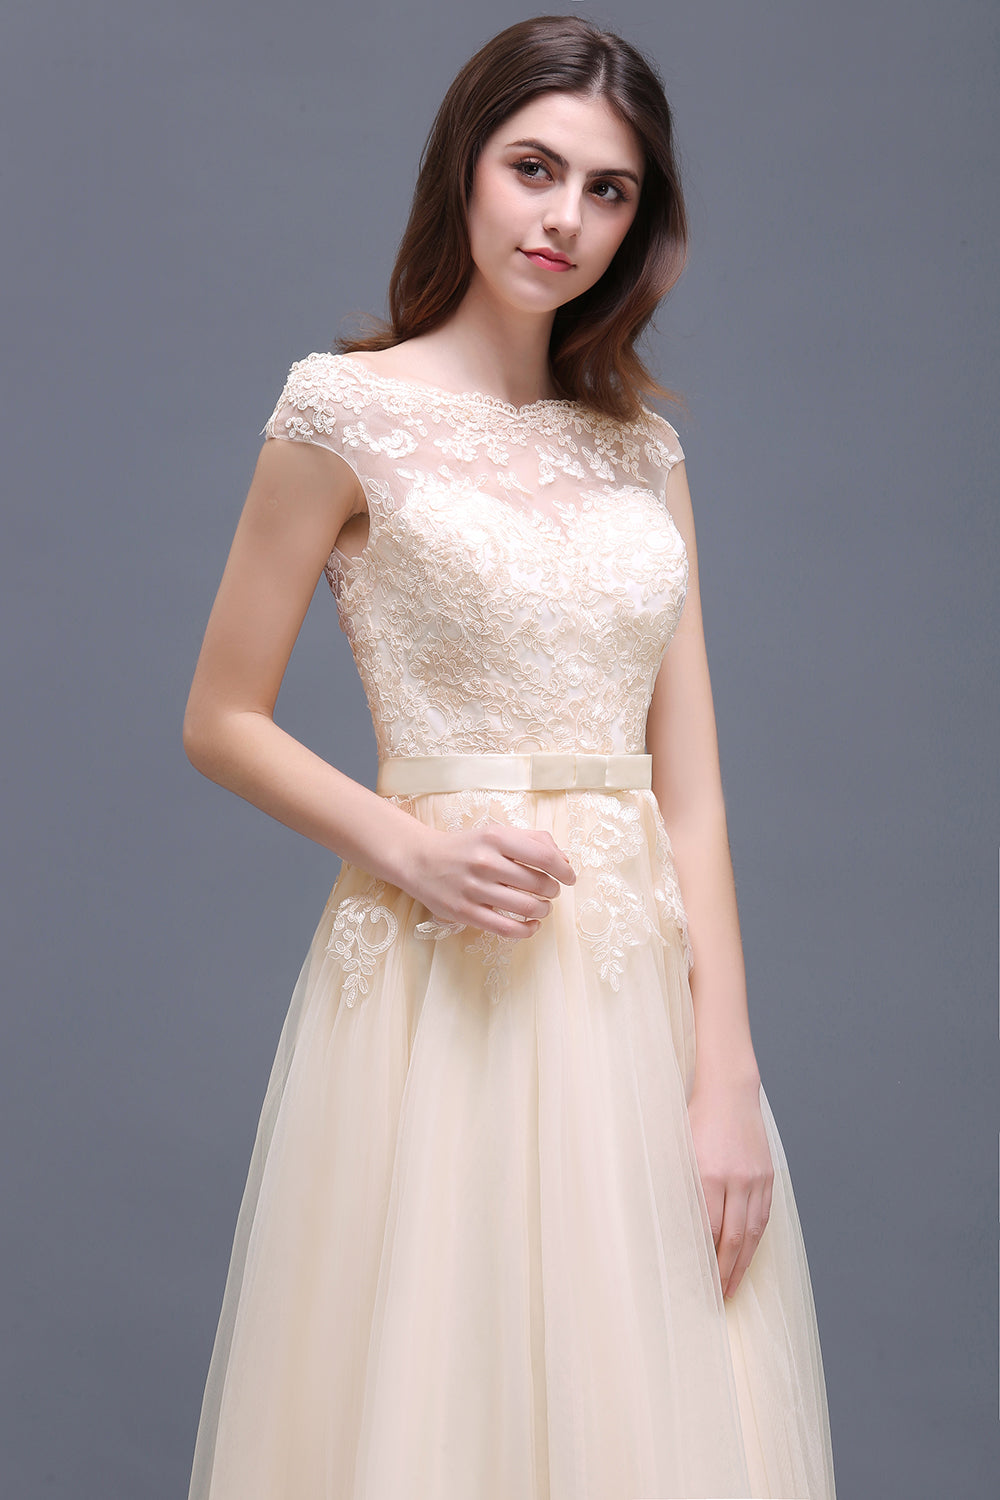 Affordable Off-the-Shoulder Champagne Bridesmaid Dresses with Appliques